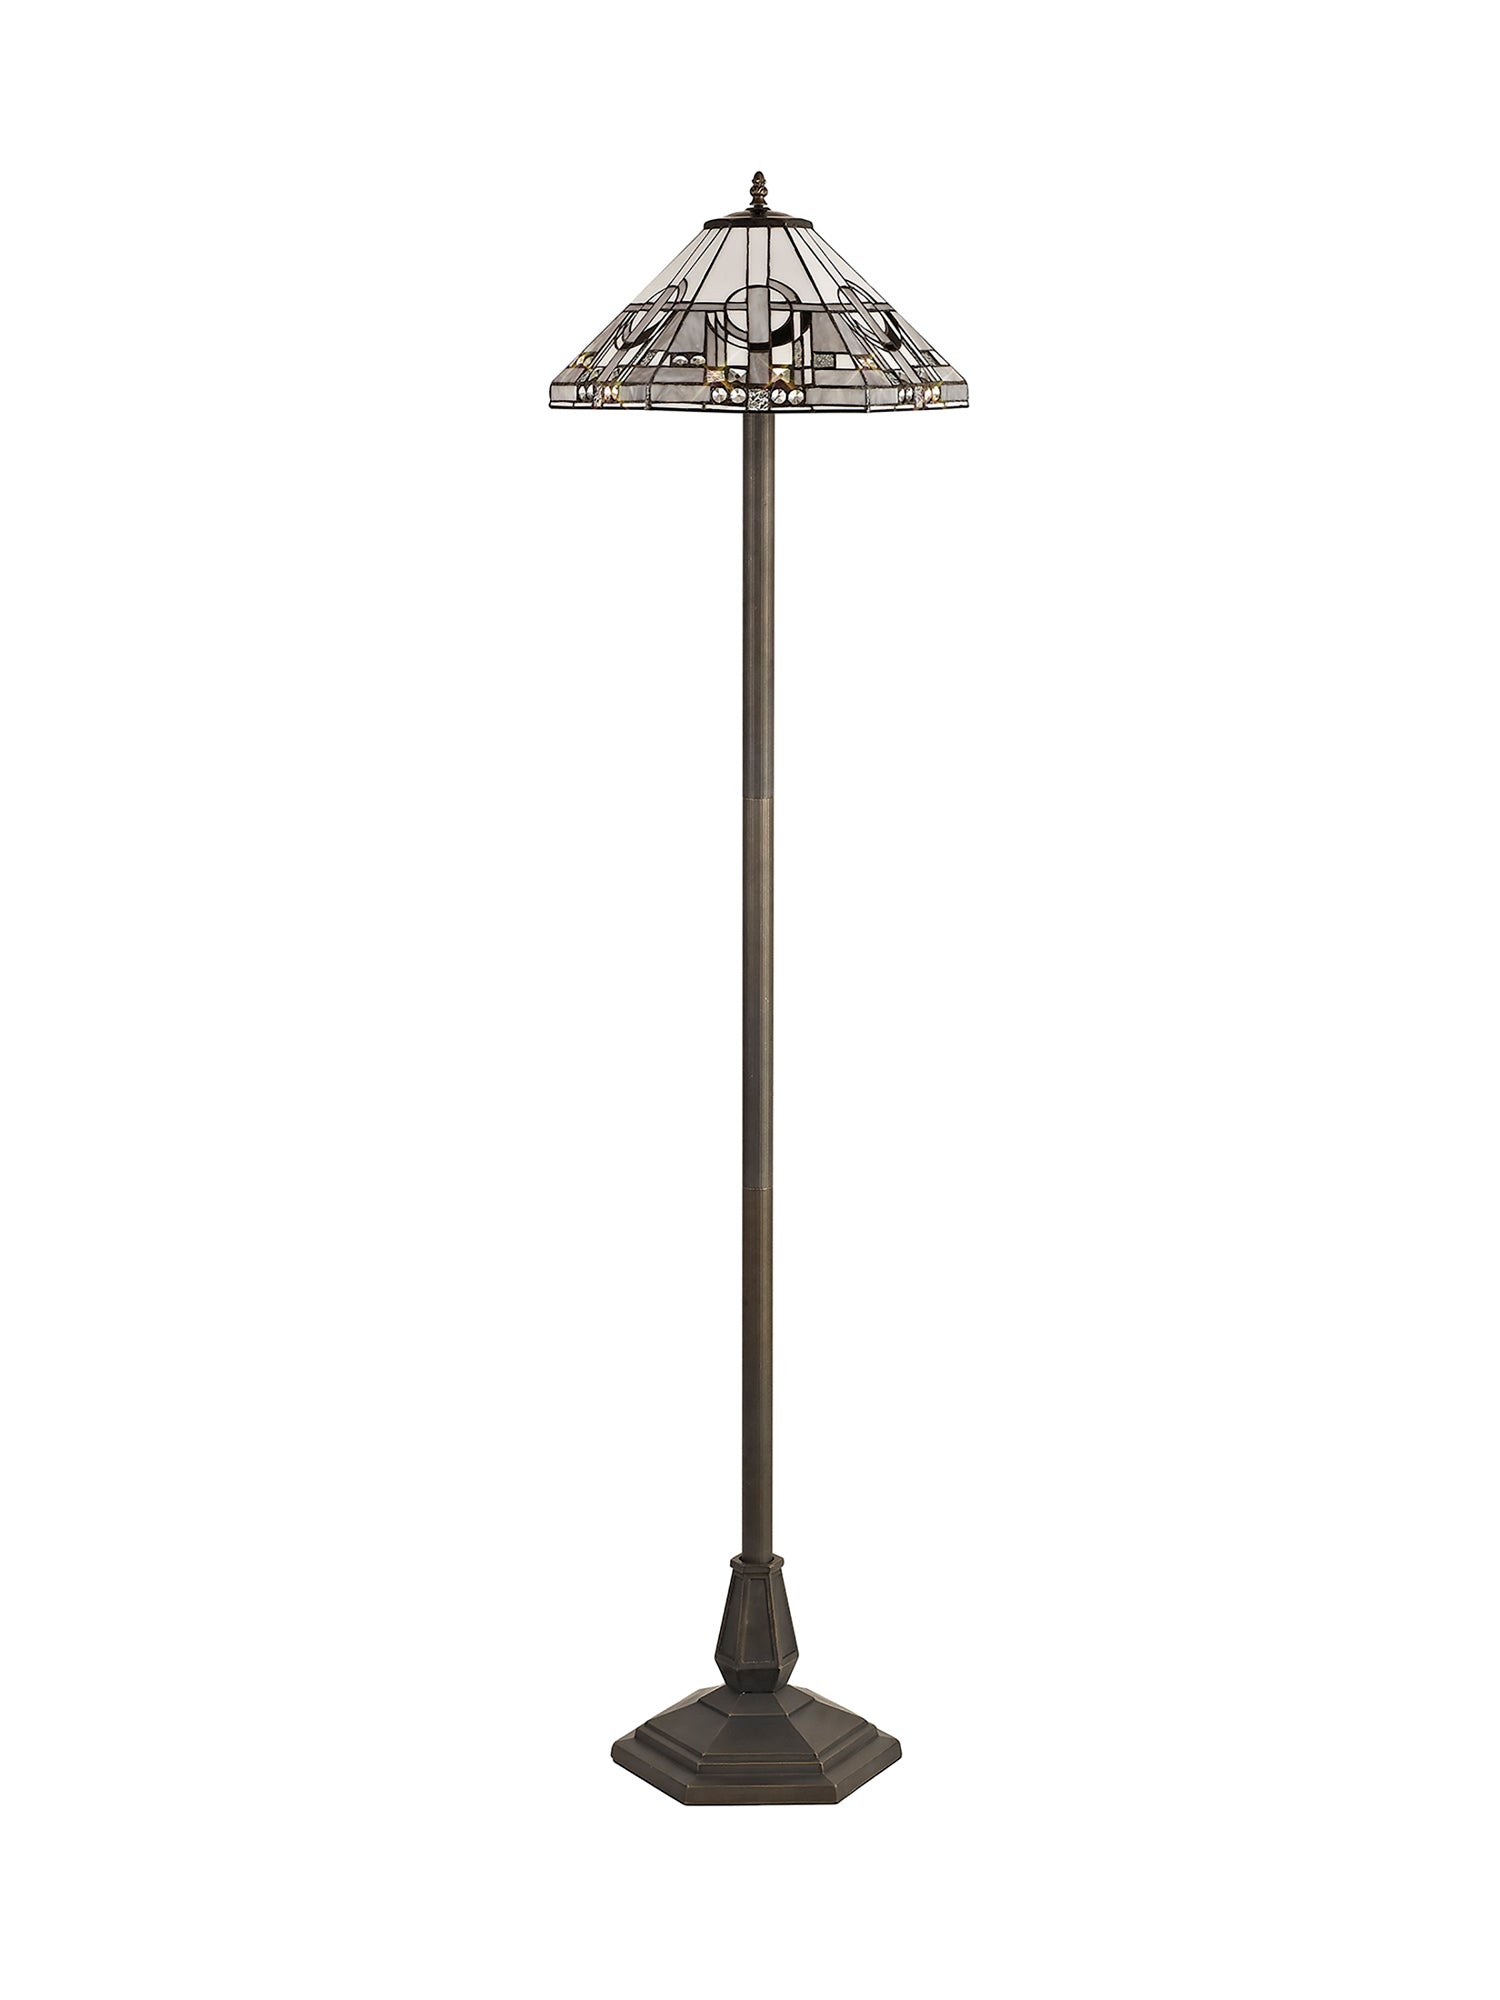 Atek 2 Light Octagonal Floor Lamp E27 With 40cm Tiffany Shade, White/Grey/Black/Clear Crystal/Aged Antique Brass